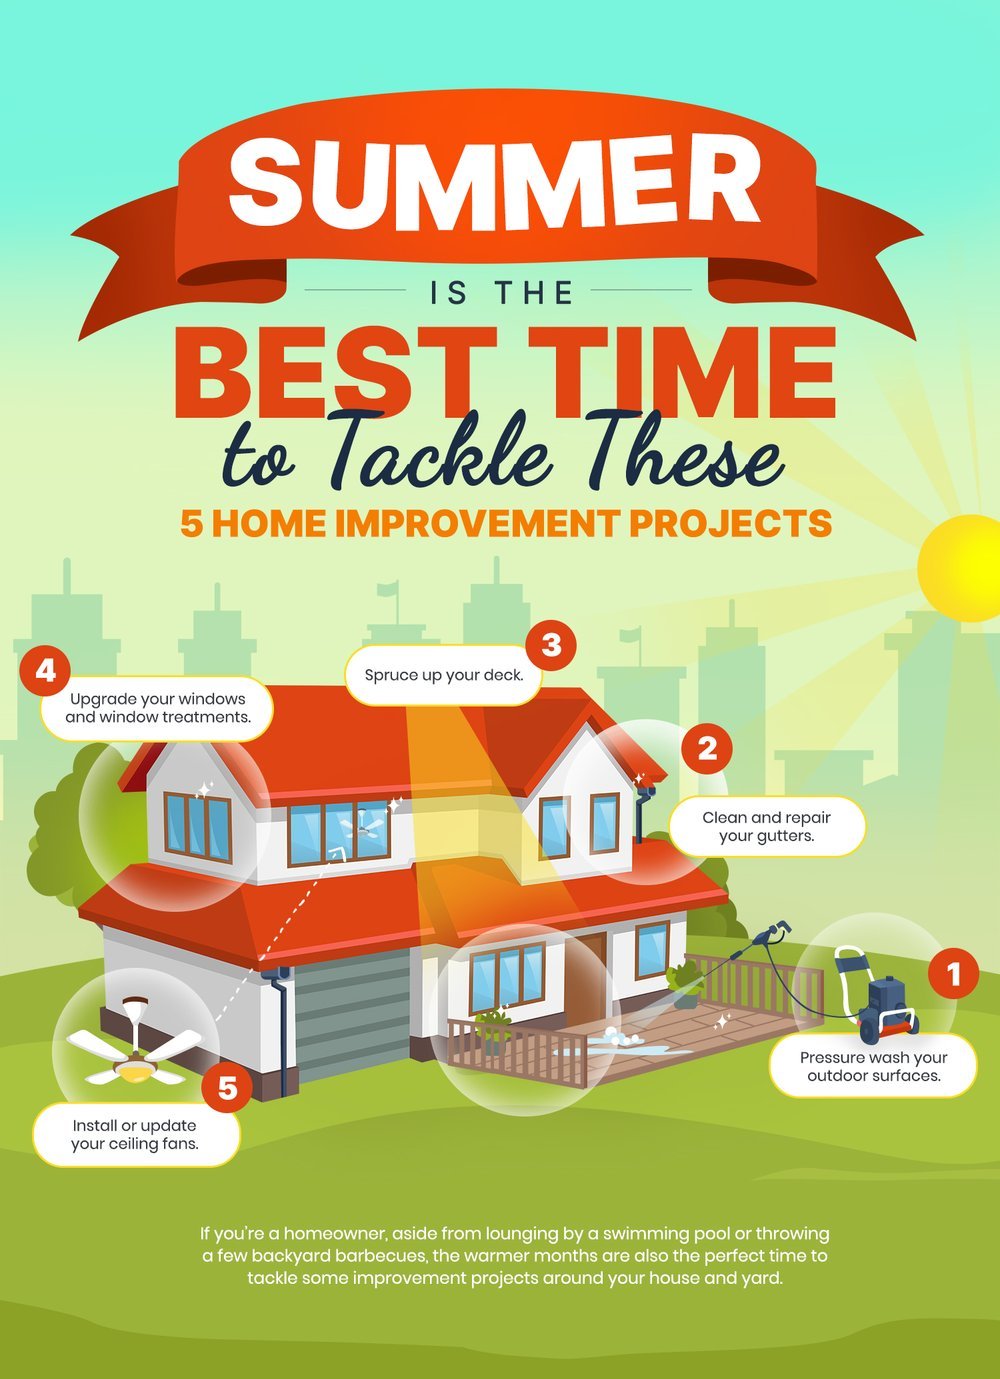 5 home improvement projects to tackle this summer